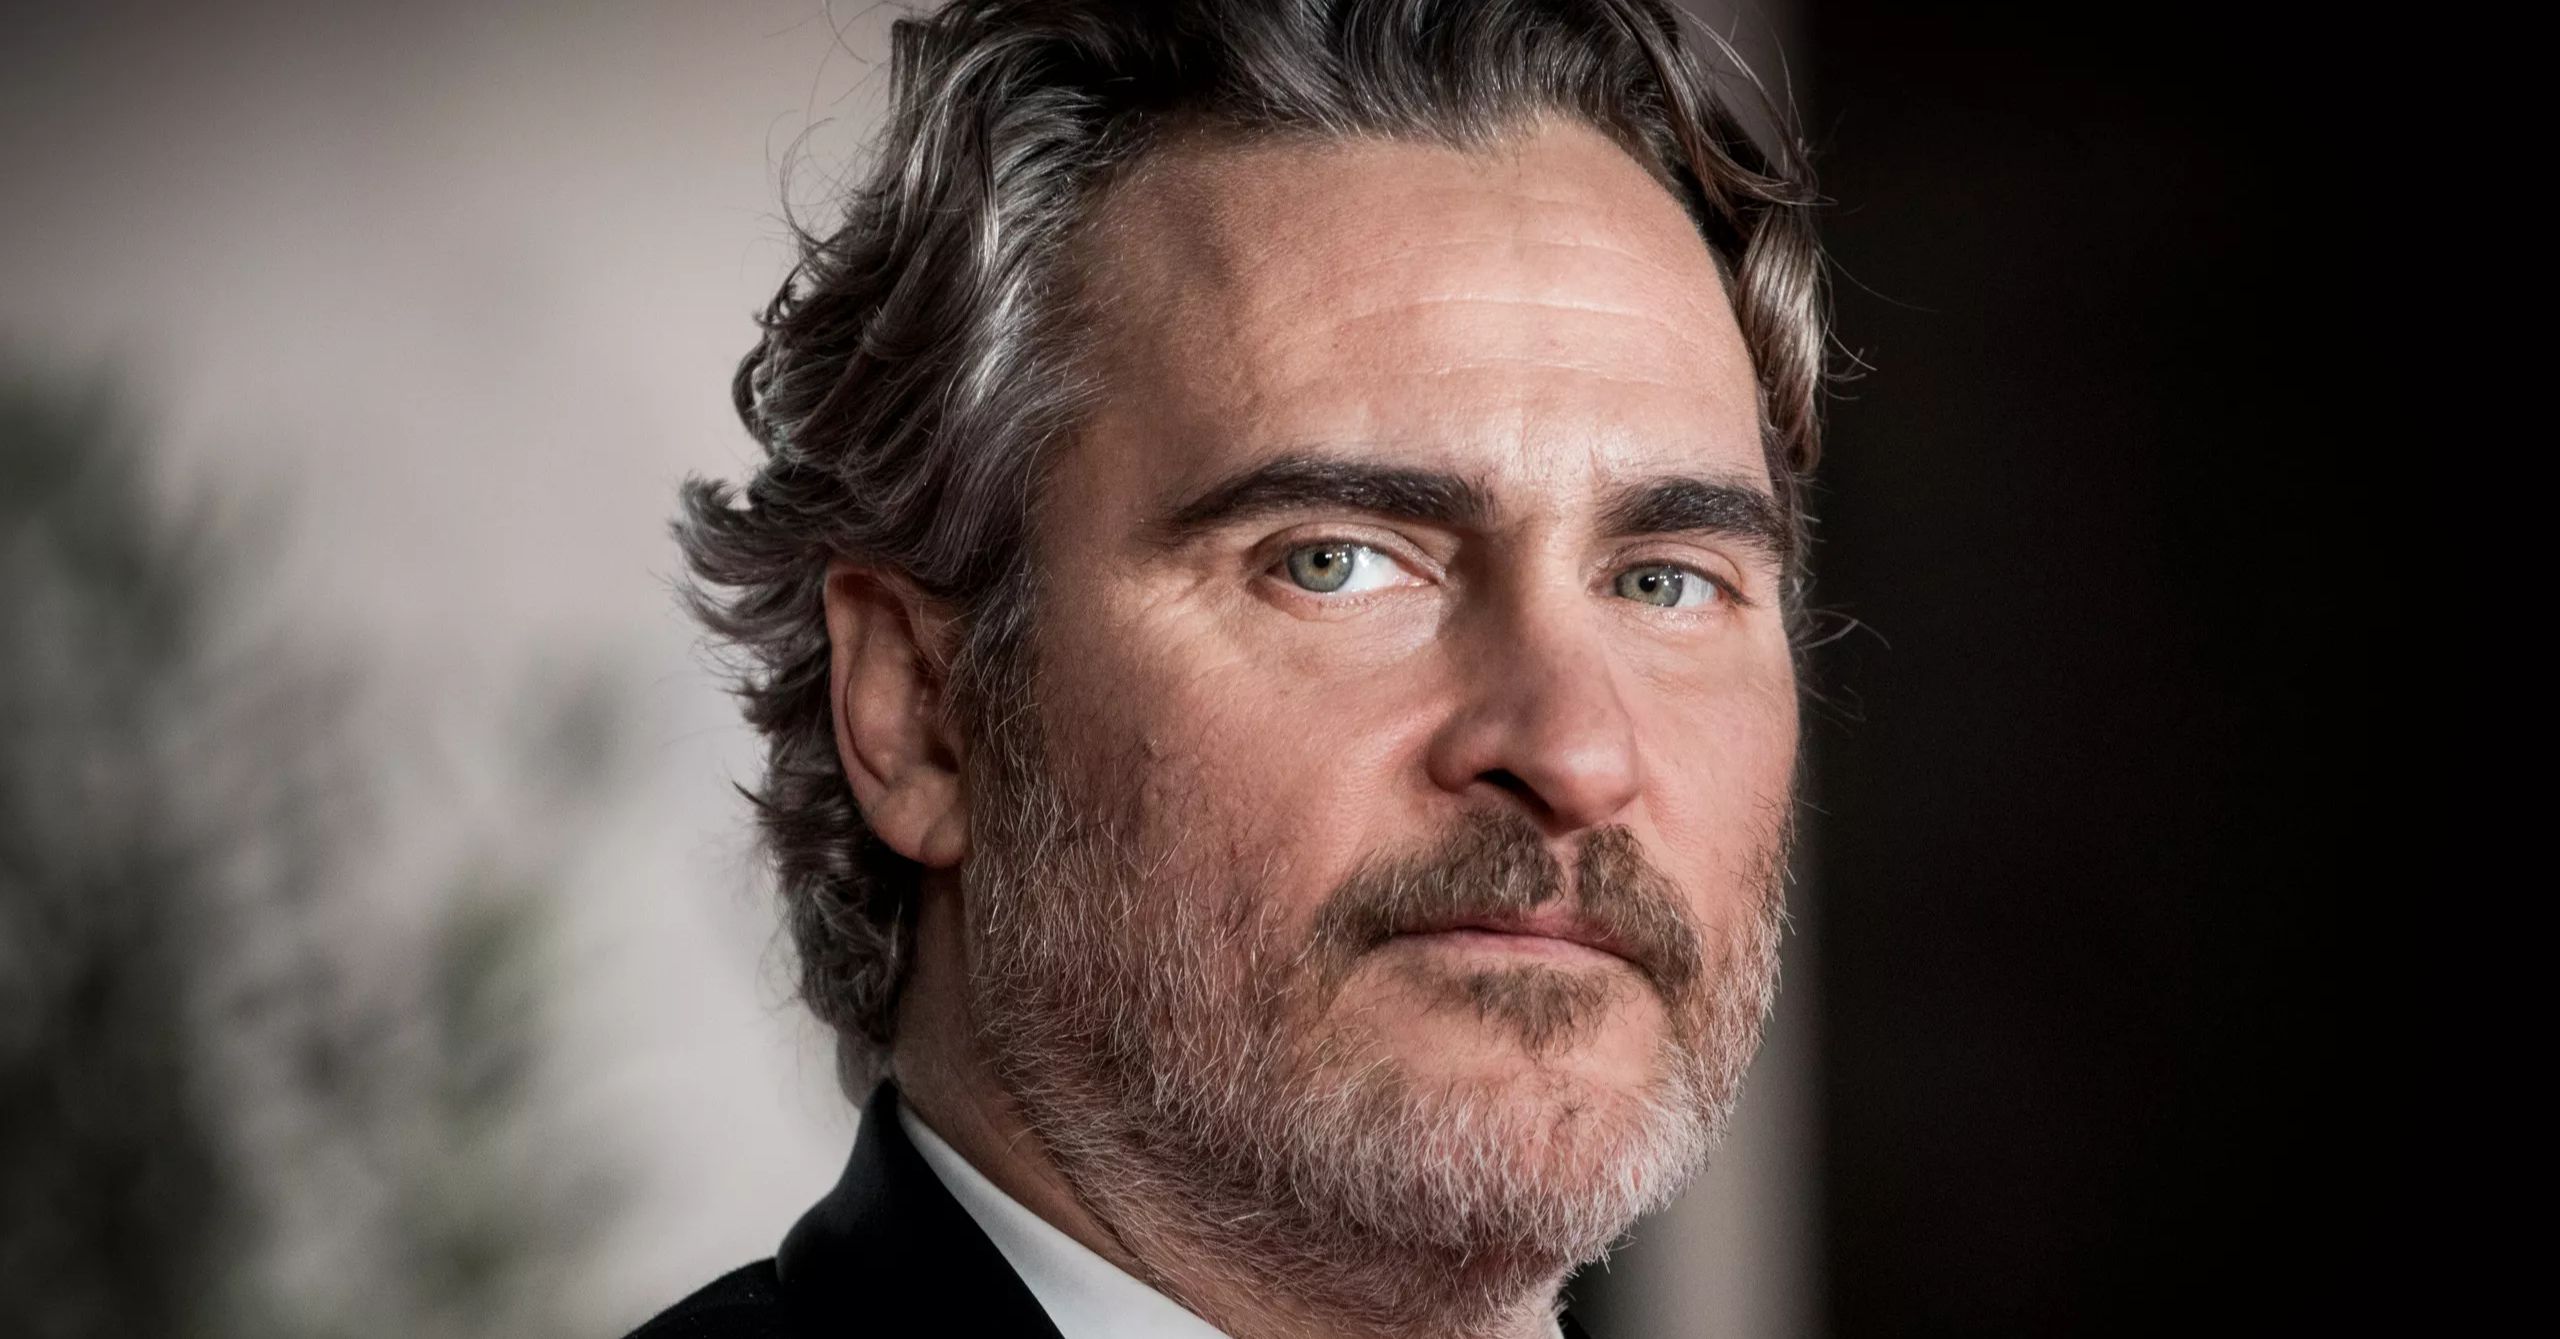 Joaquin Phoenix Speaks About Humility and the 'Fight Against Injustice' in Oscar ...